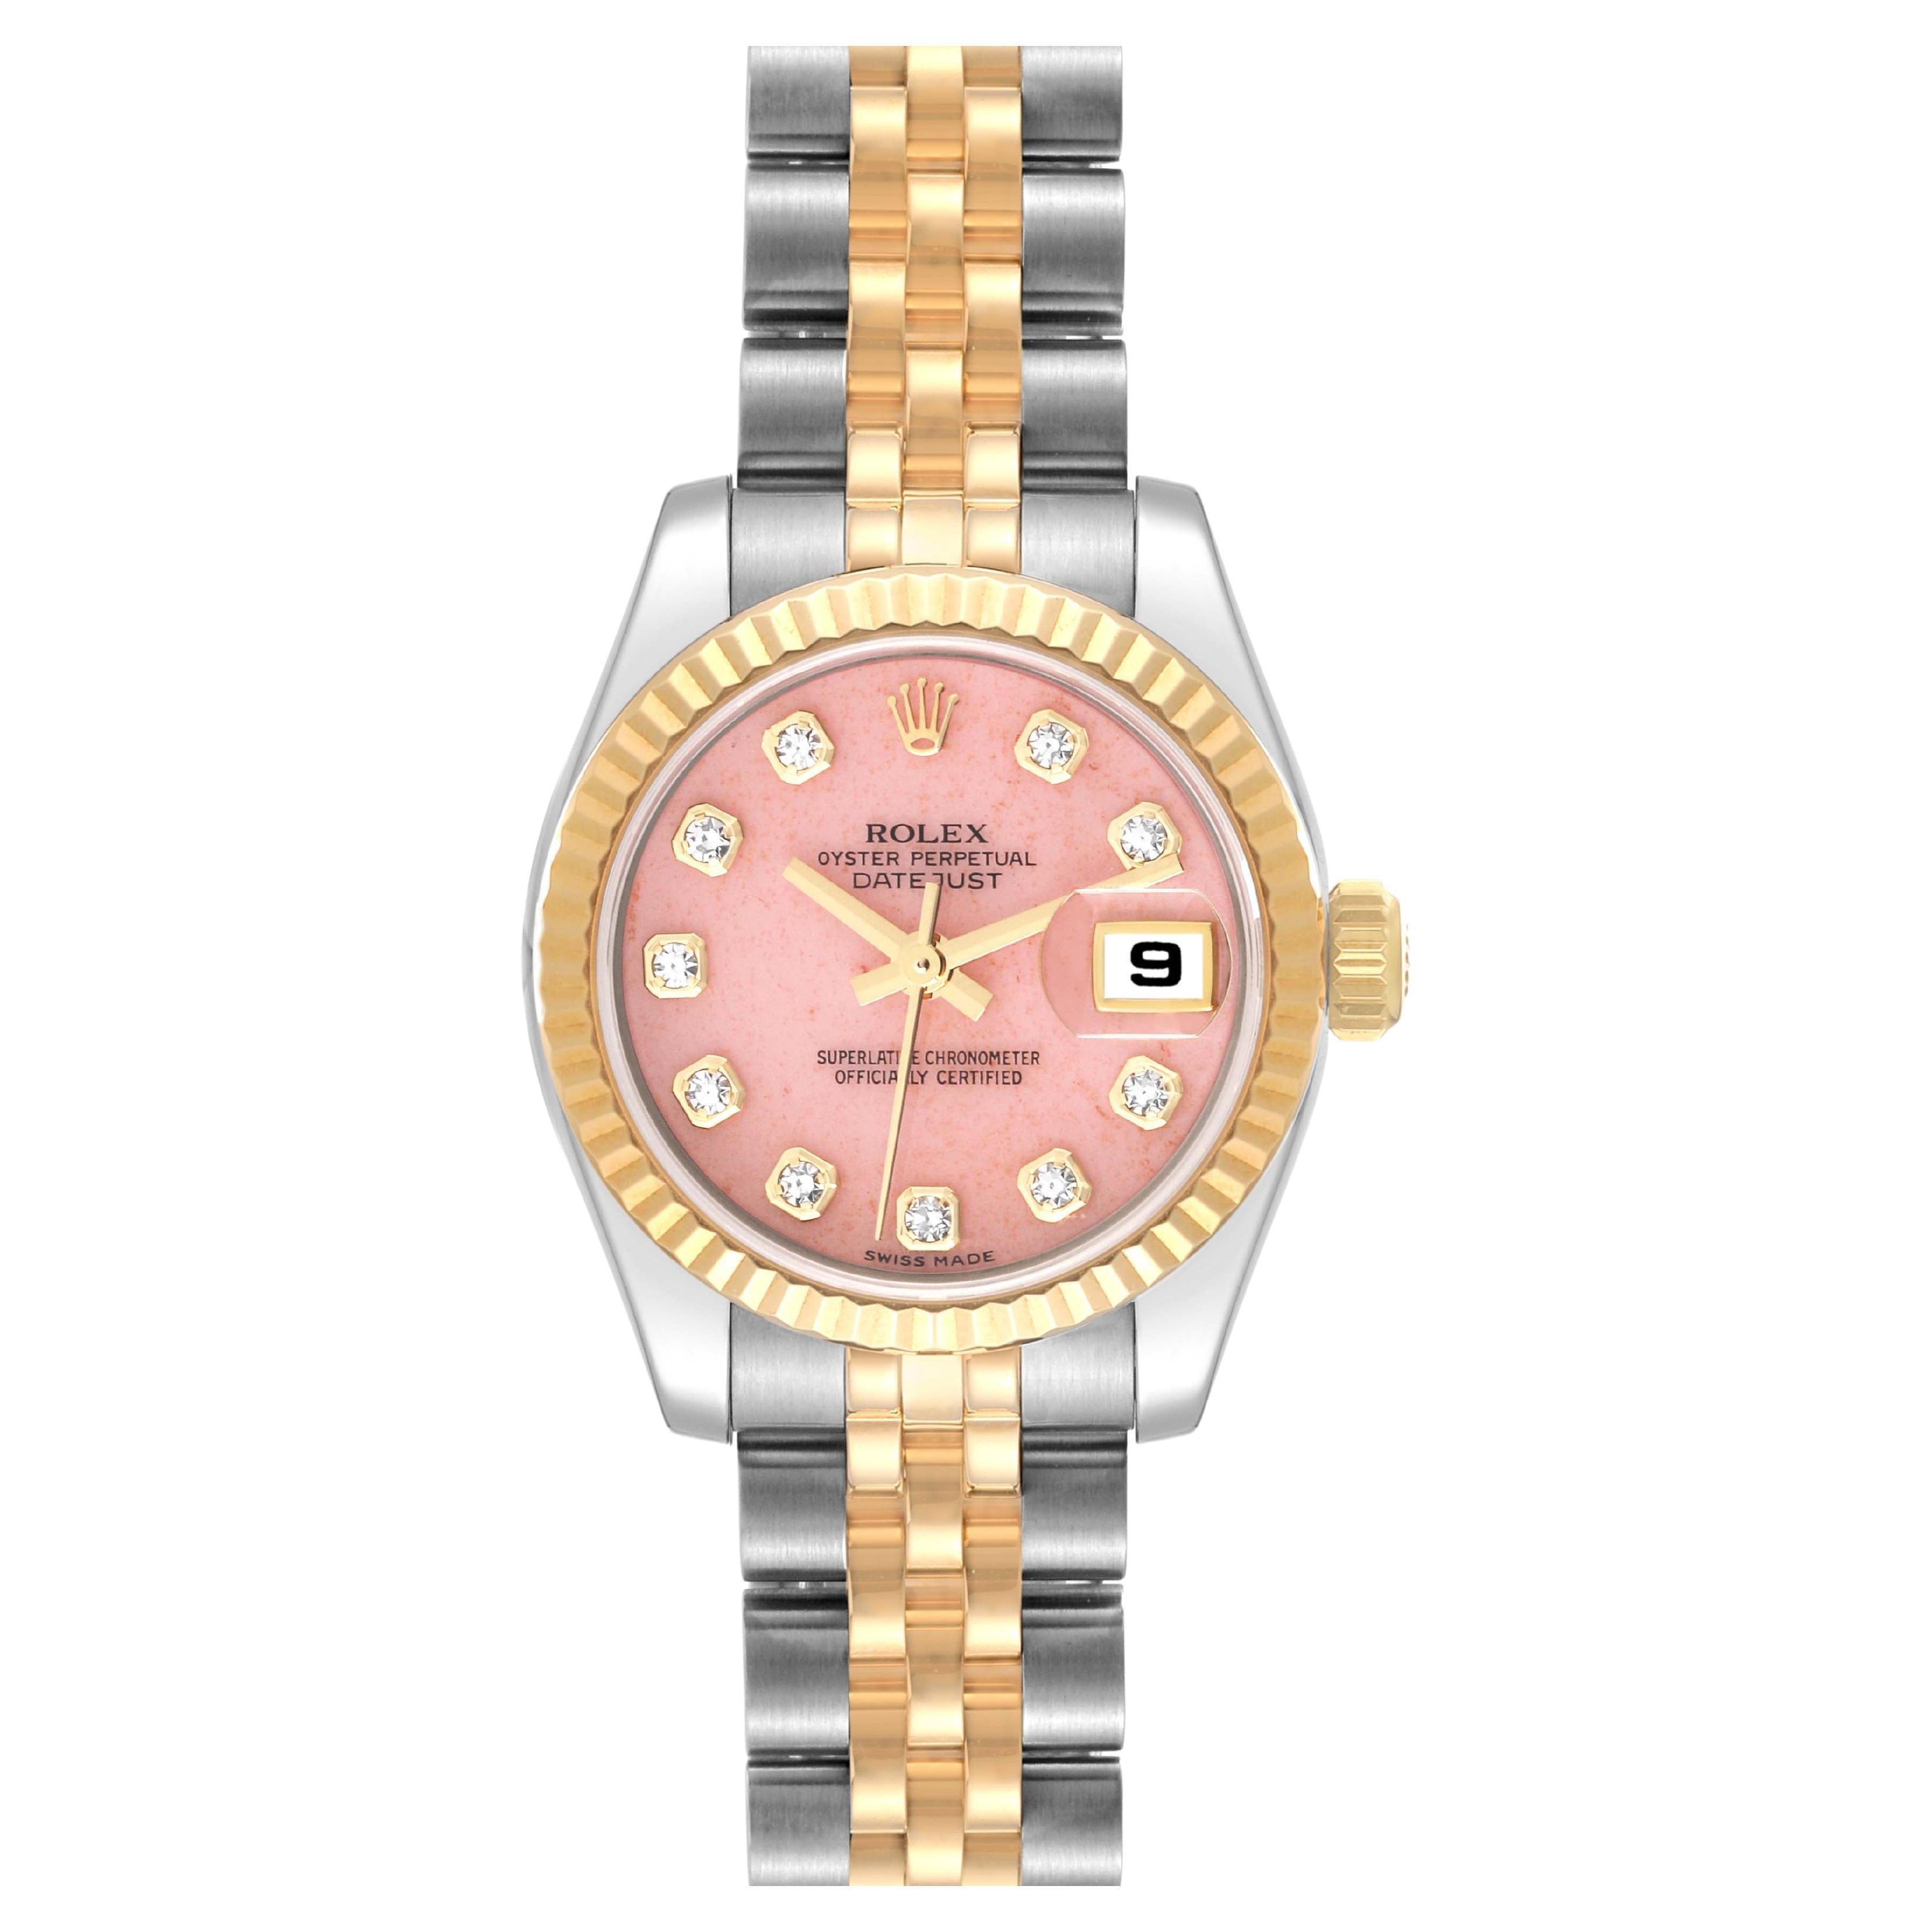 Rolex Datejust Steel Yellow Gold Coral Diamond Dial Ladies Watch 179173 For Sale